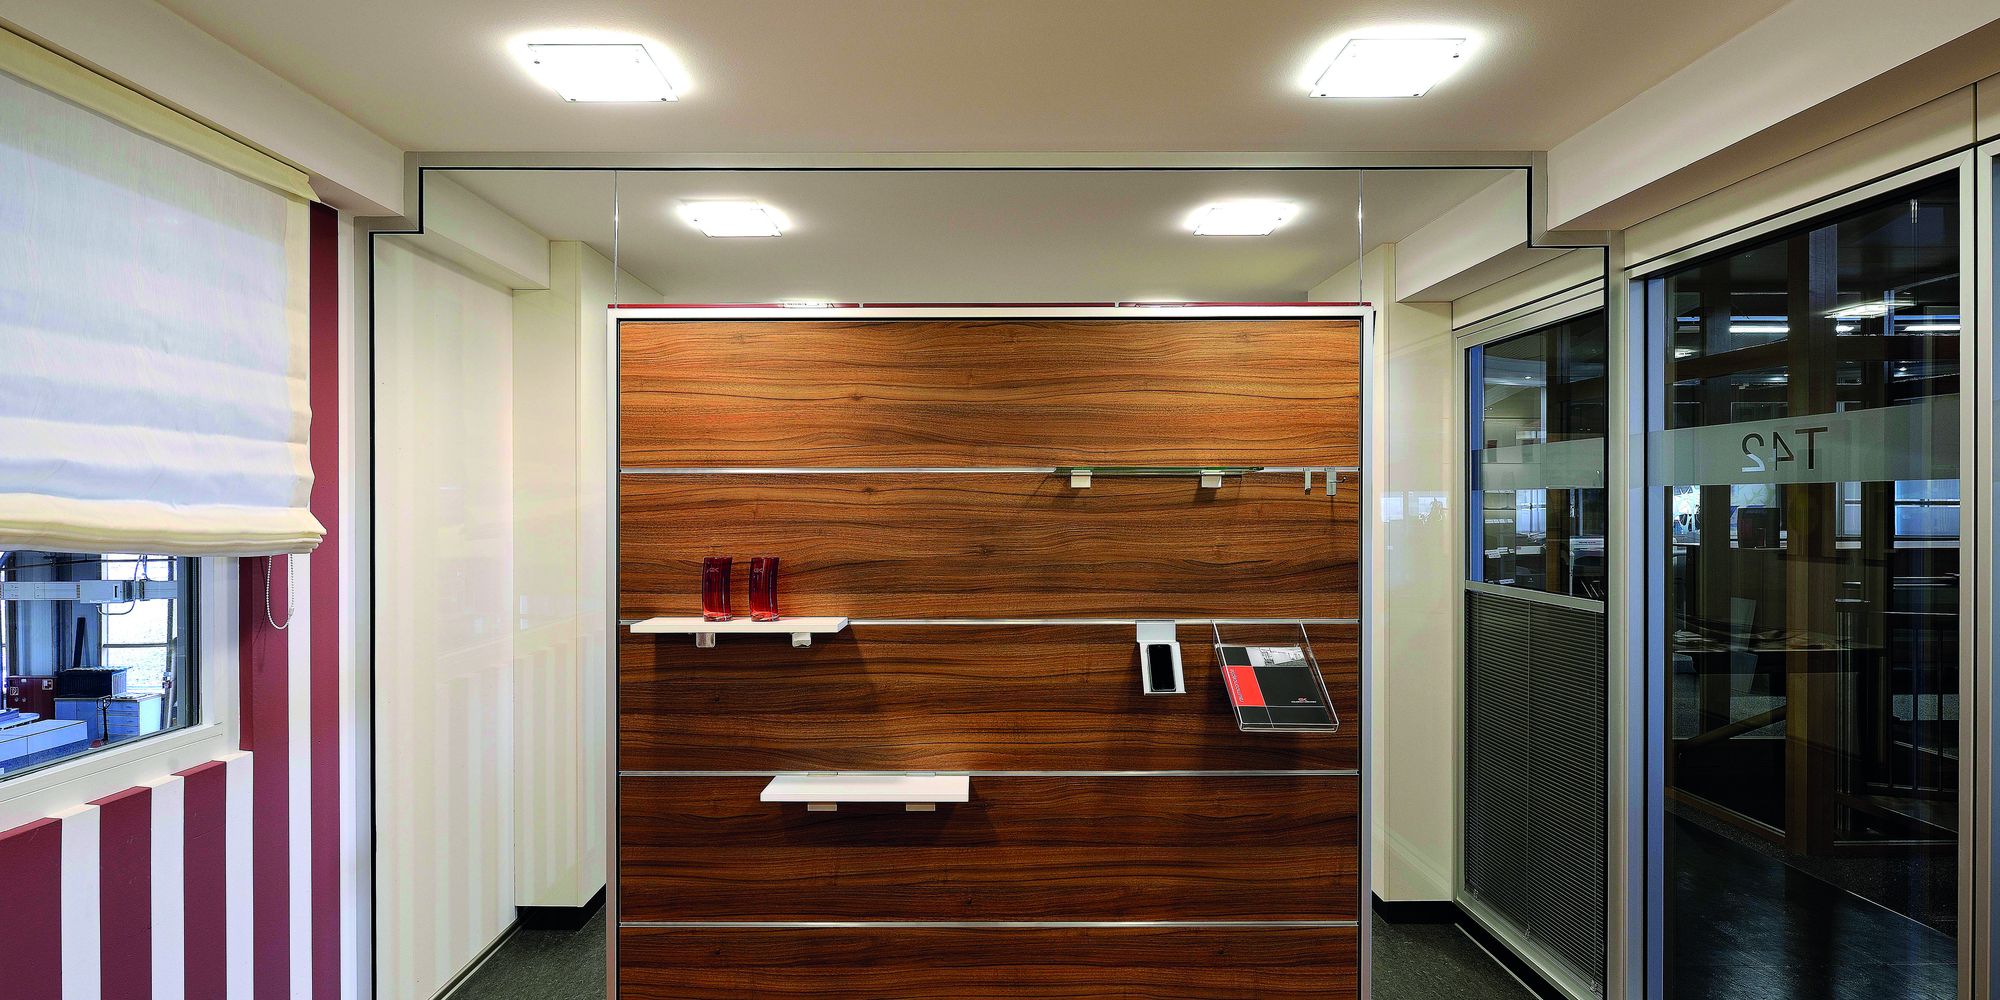 Working wall with horizontal wall storage integrated into T50 all-glass wall